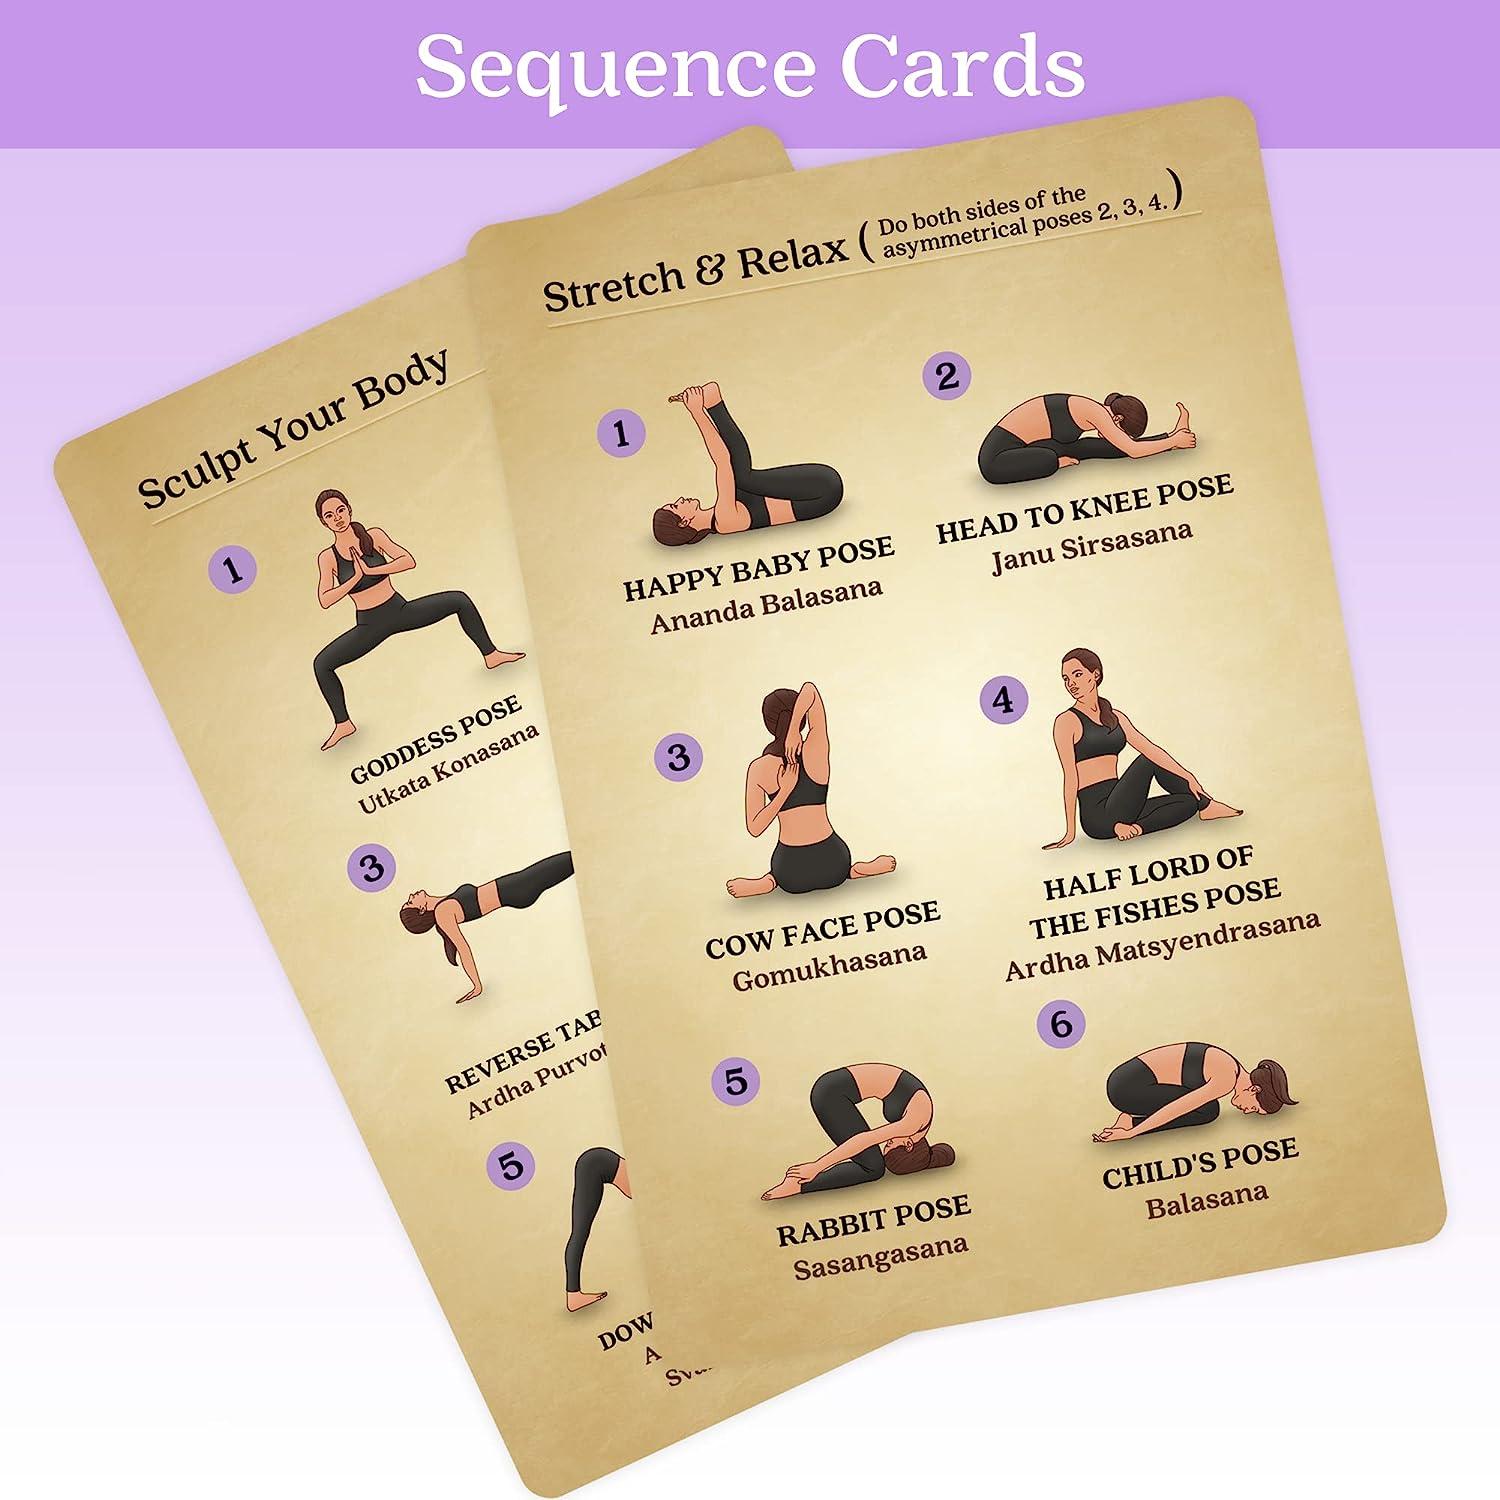 Asana Moon Premium Yoga Cards for Beginners Yoga kit and Workout